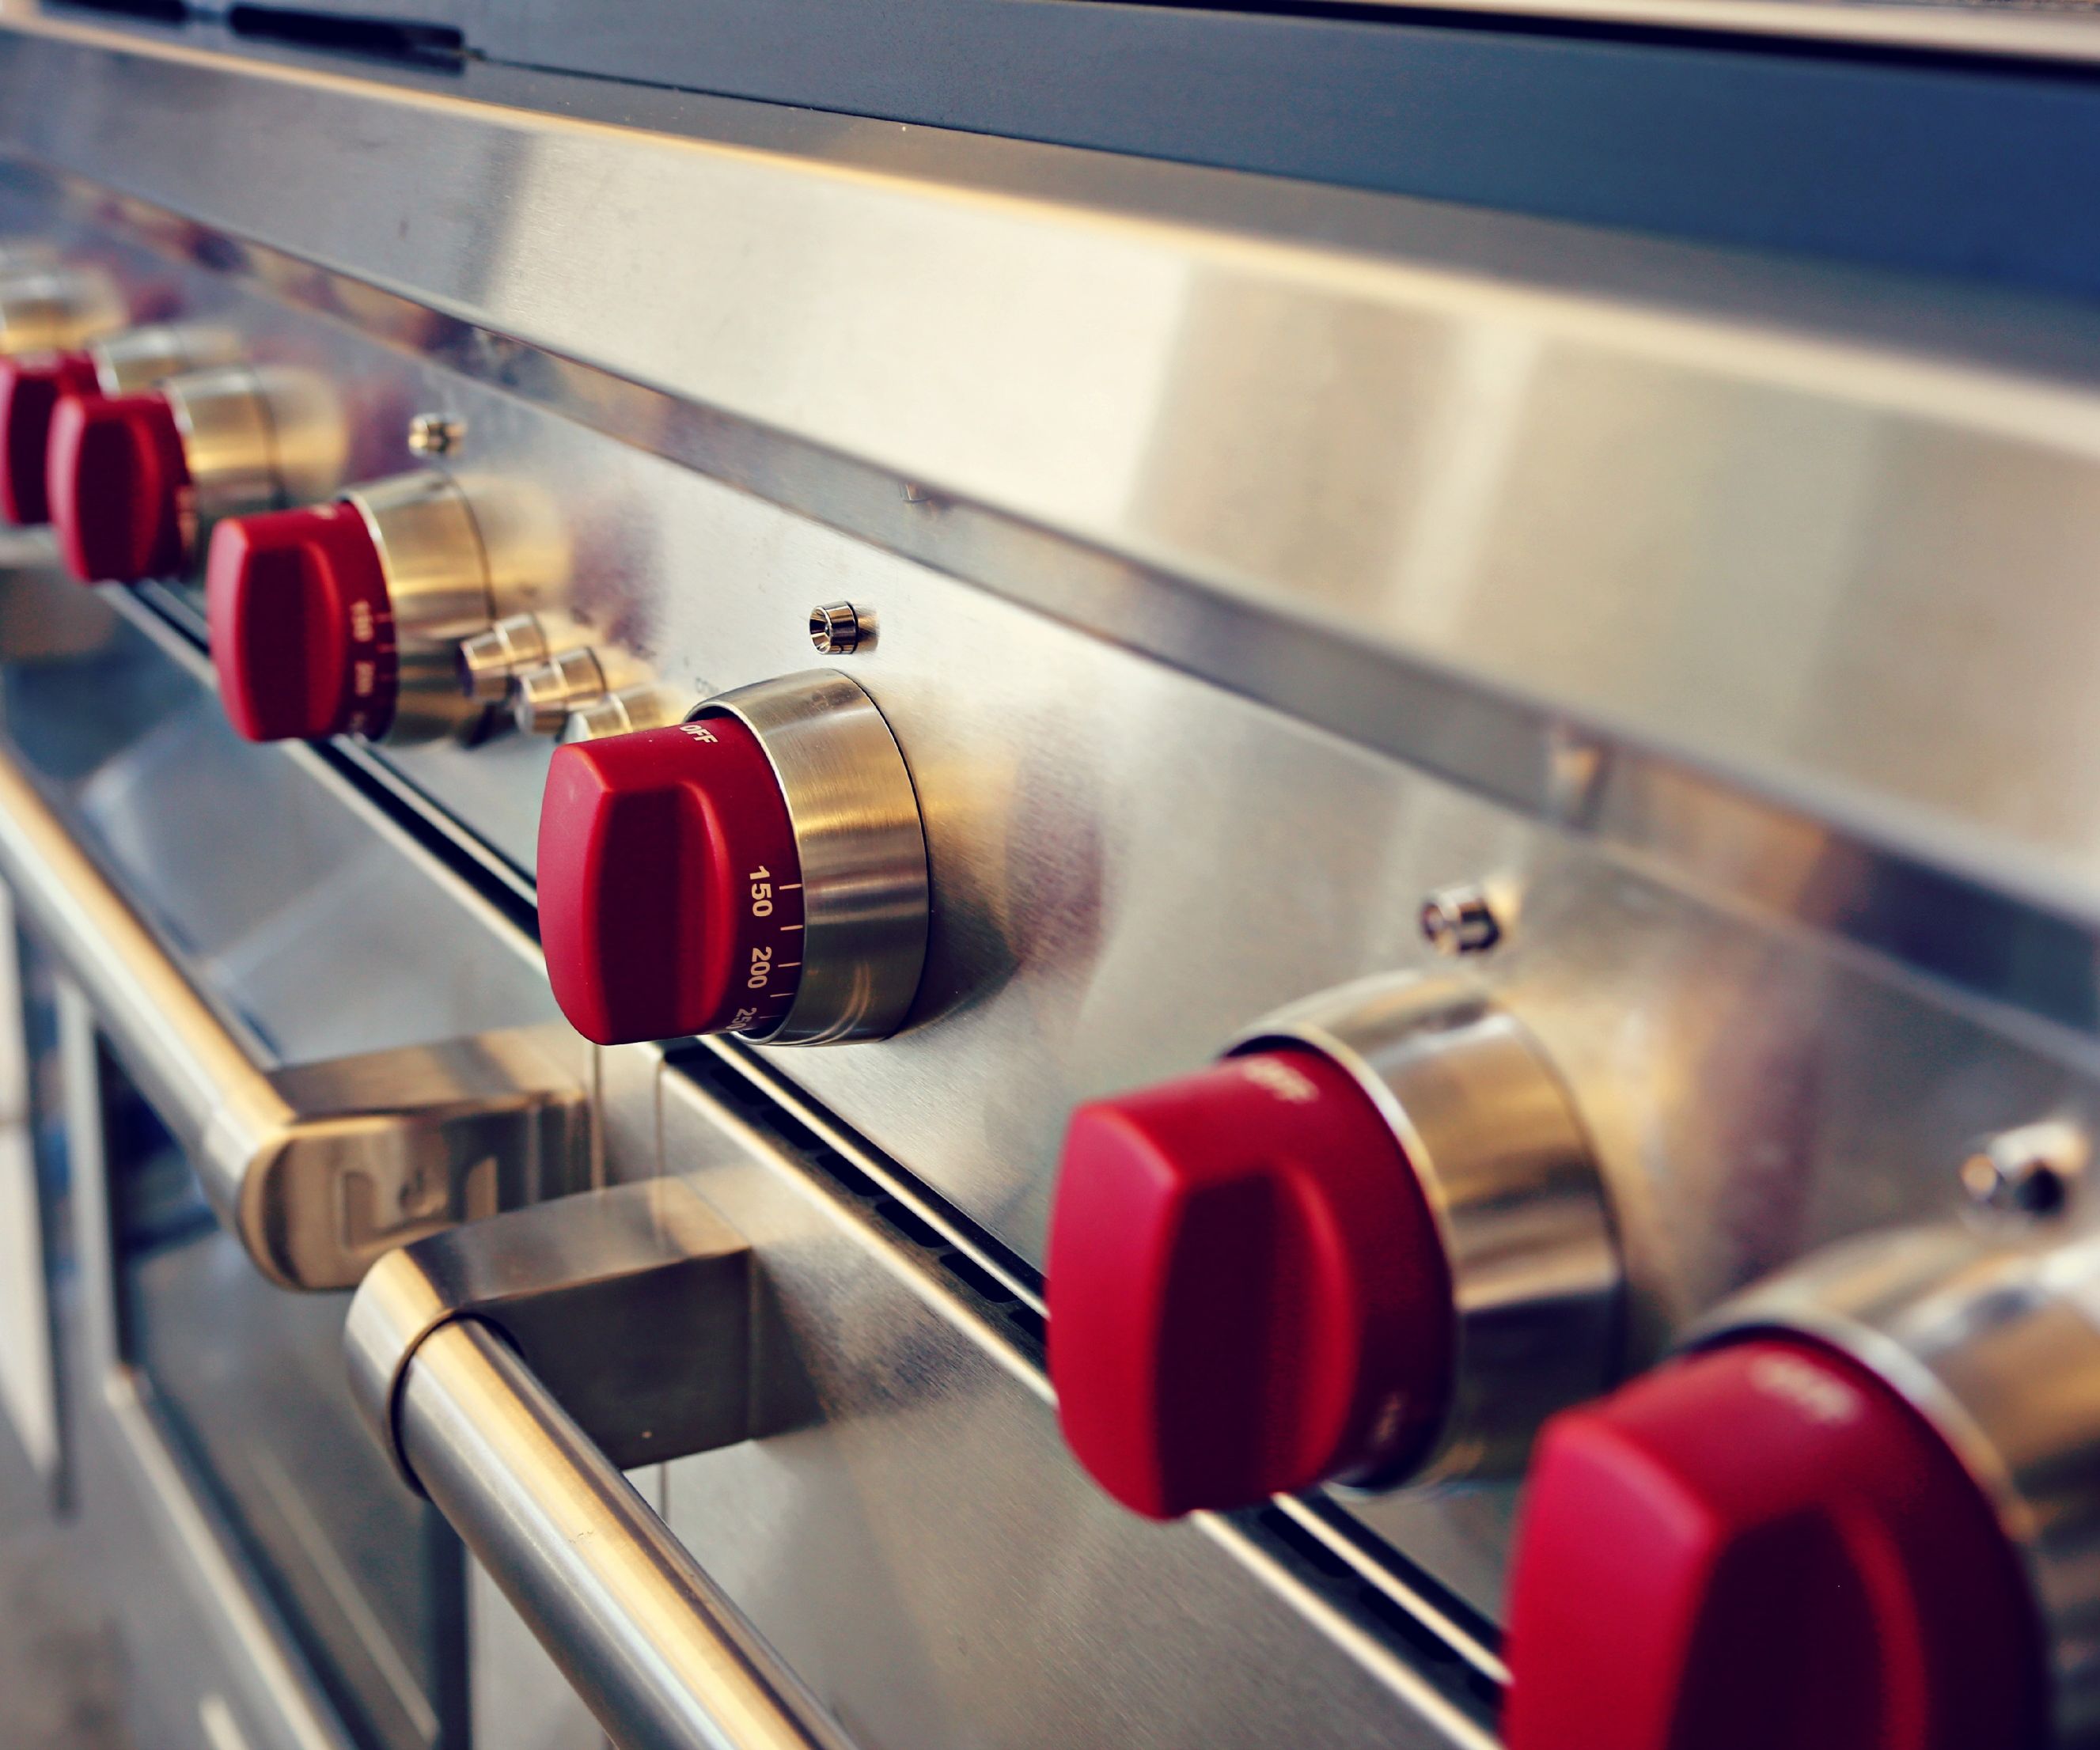 How to clean Stainless Steel Appliances